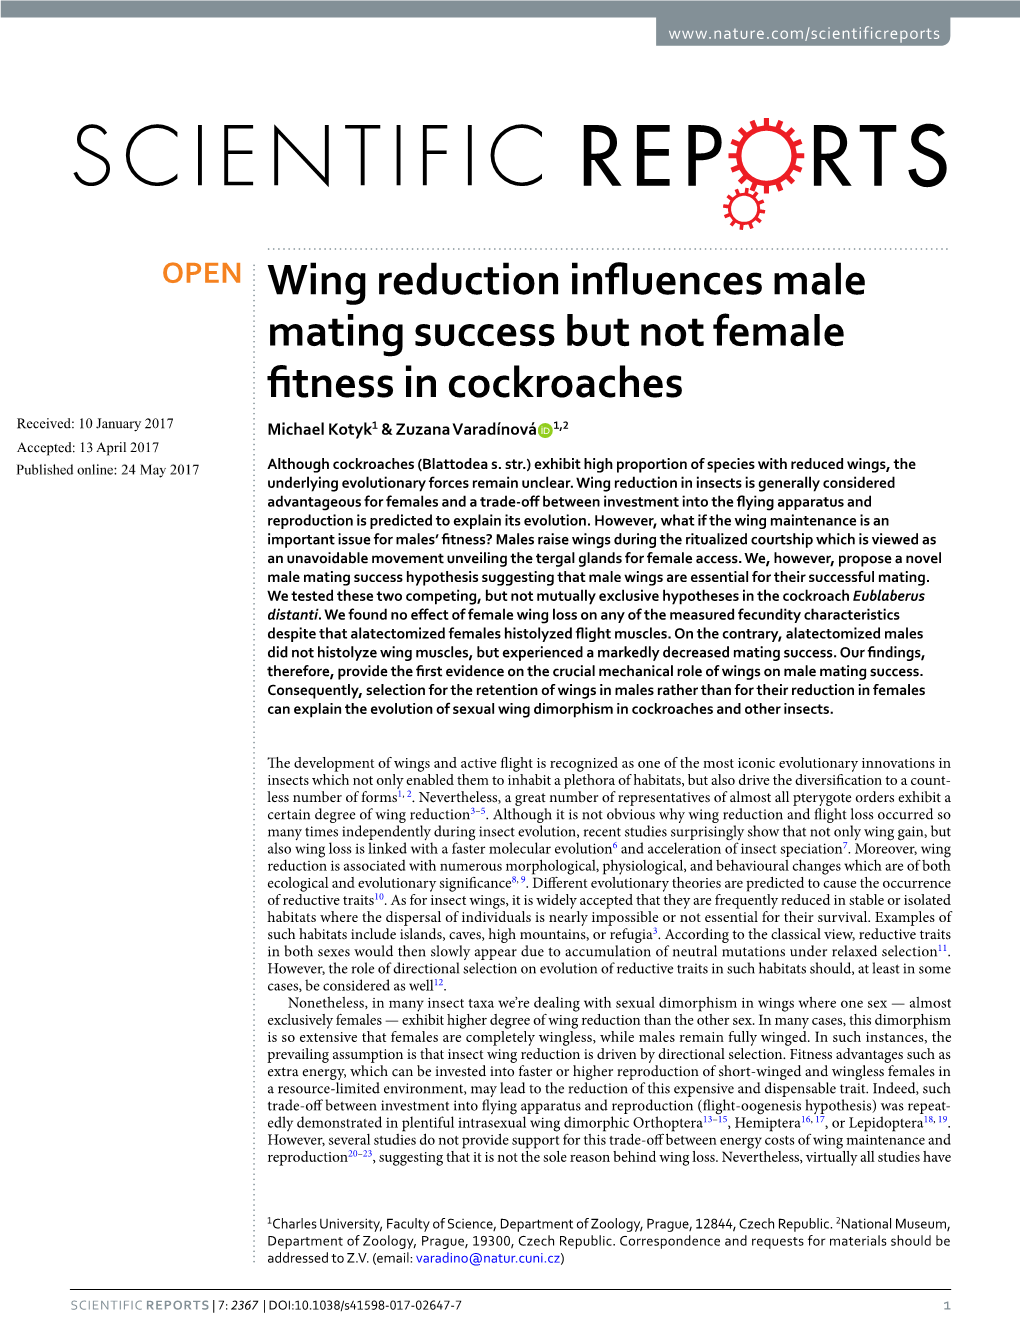 Wing Reduction Influences Male Mating Success but Not Female Fitness in Cockroaches